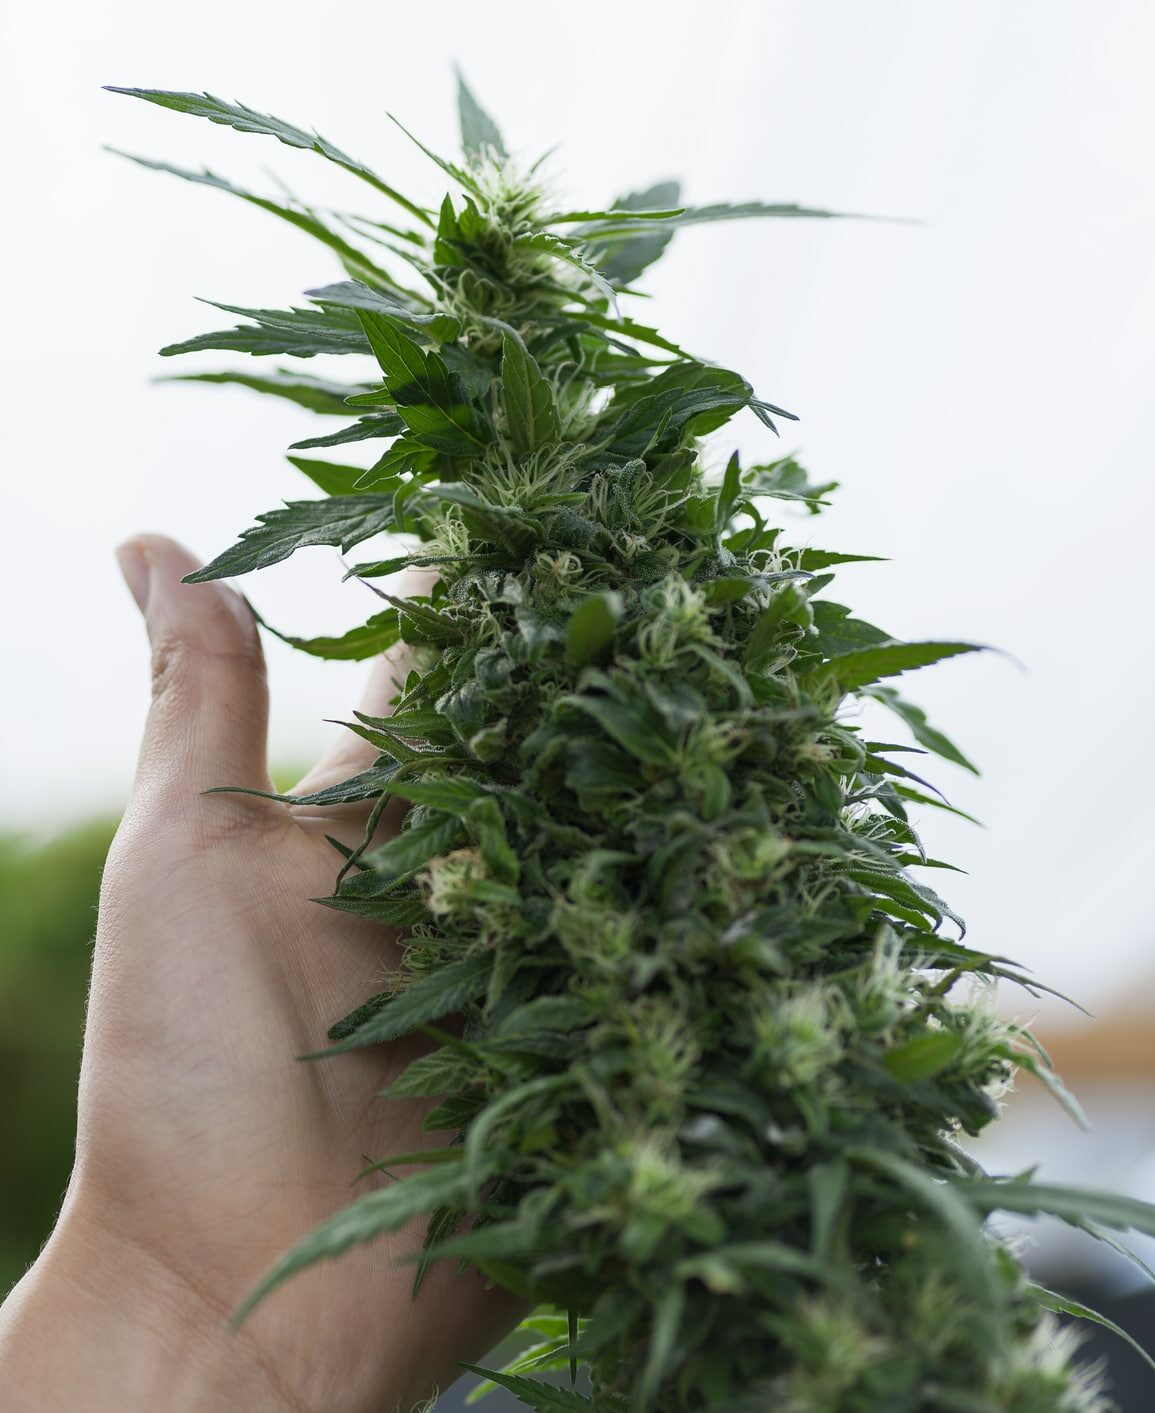 A farmer's hand checking the status of his marijuana plants and their growing condition and form so that he can soon harvest his marijuana tea product.